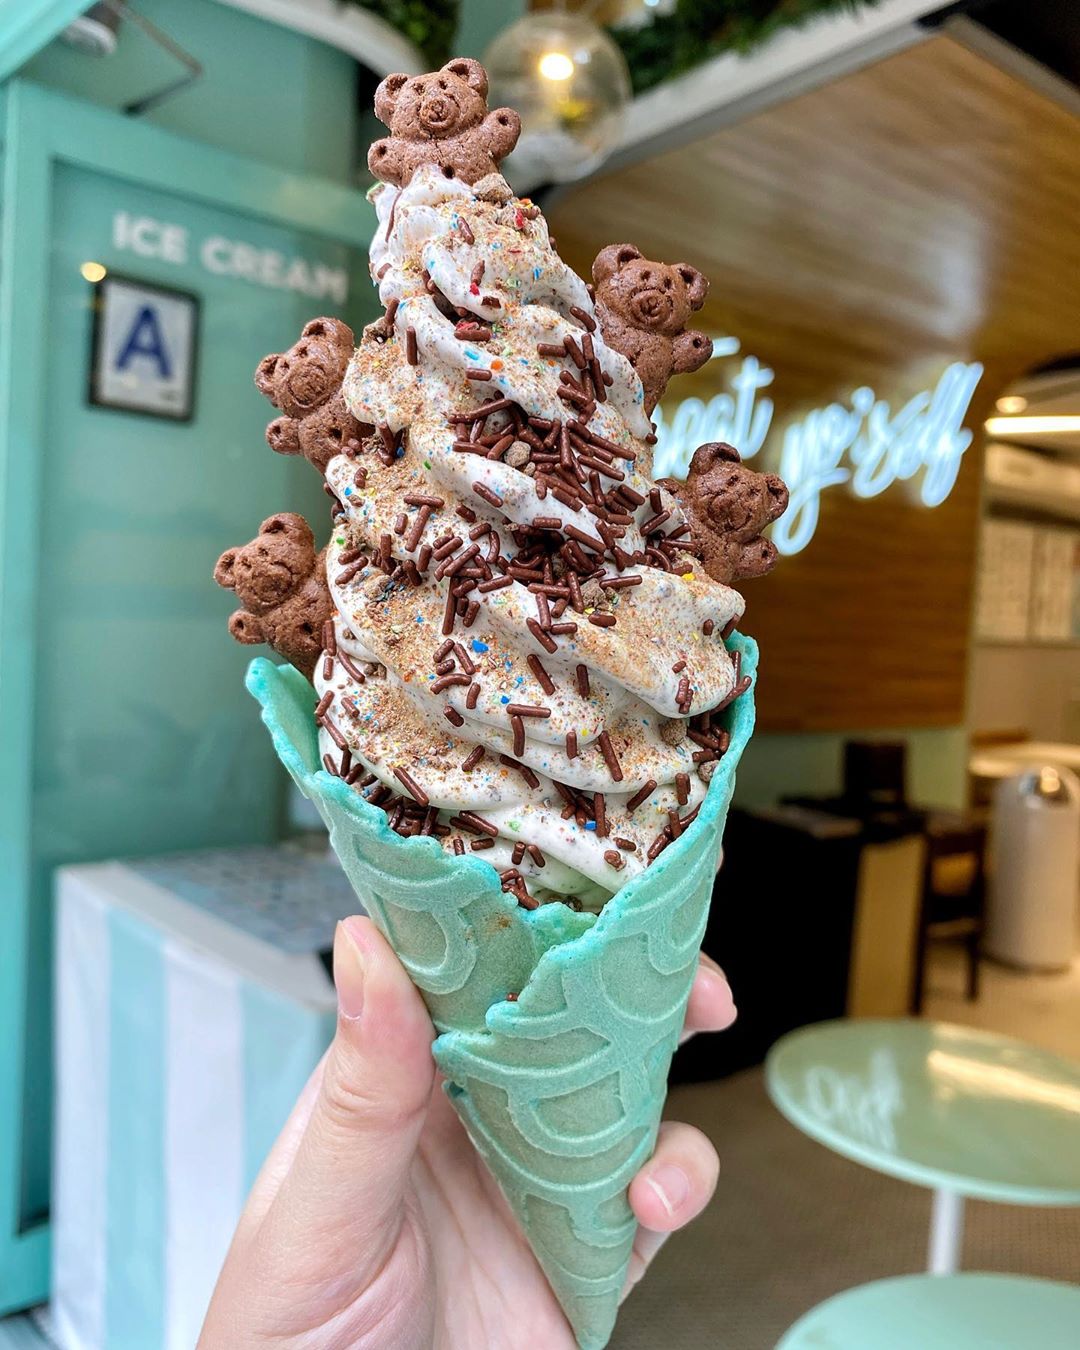 5 Ice Cream Shops in NYC You Should Know About